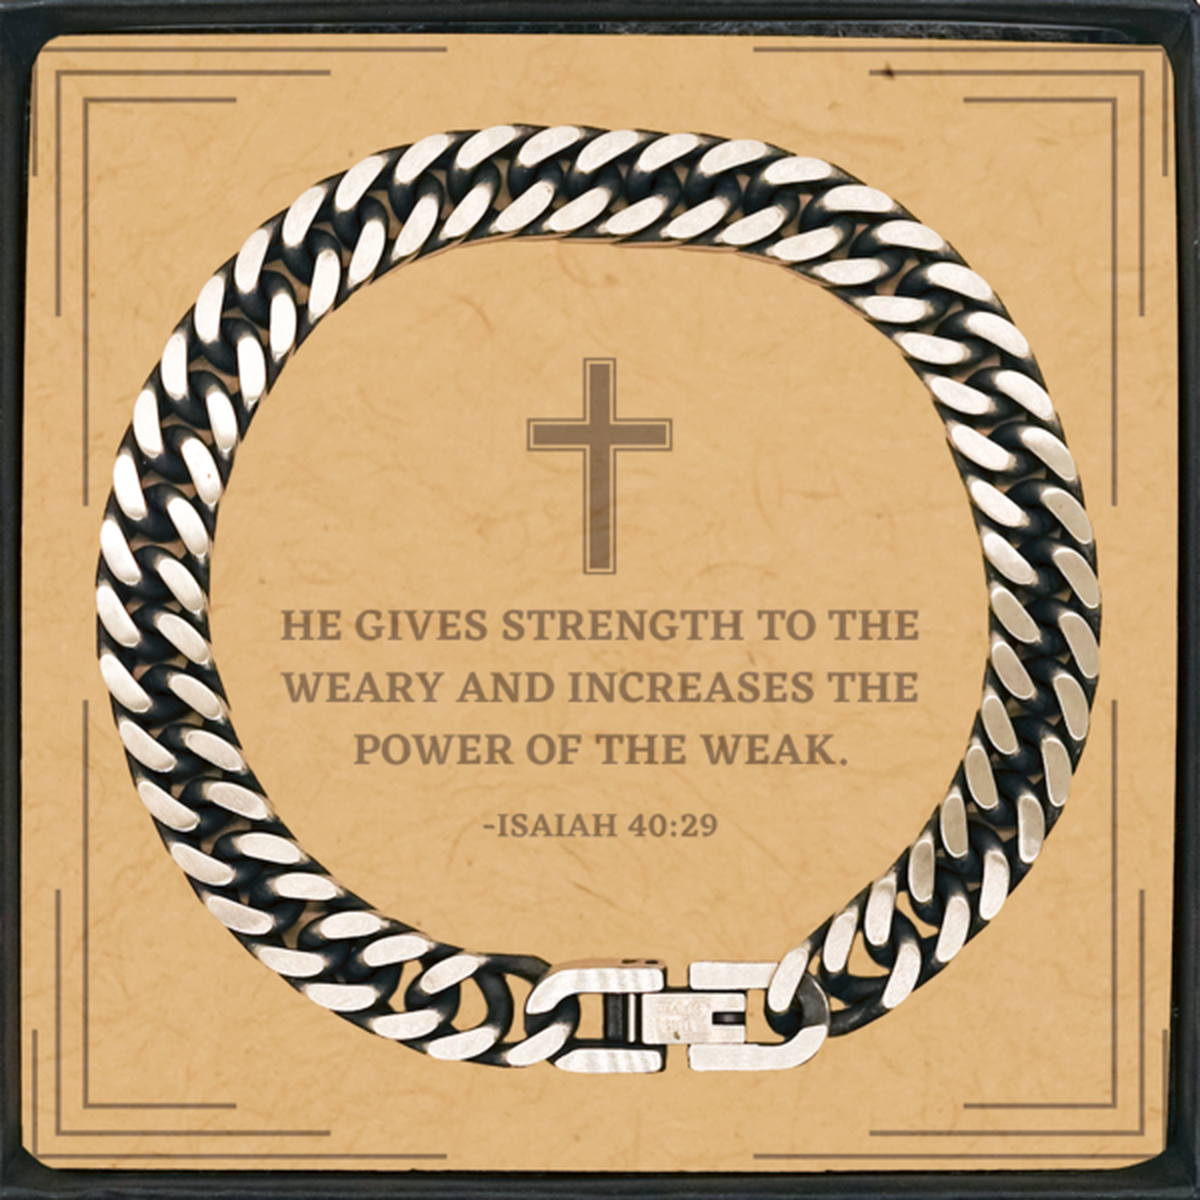 Baptism Gifts For Teenage Boys Girls, Christian Bible Verse Cuban Link Chain Bracelet, He gives strength to the weary, Confirmation Gifts, Bible Verse Card for Son, Godson, Grandson